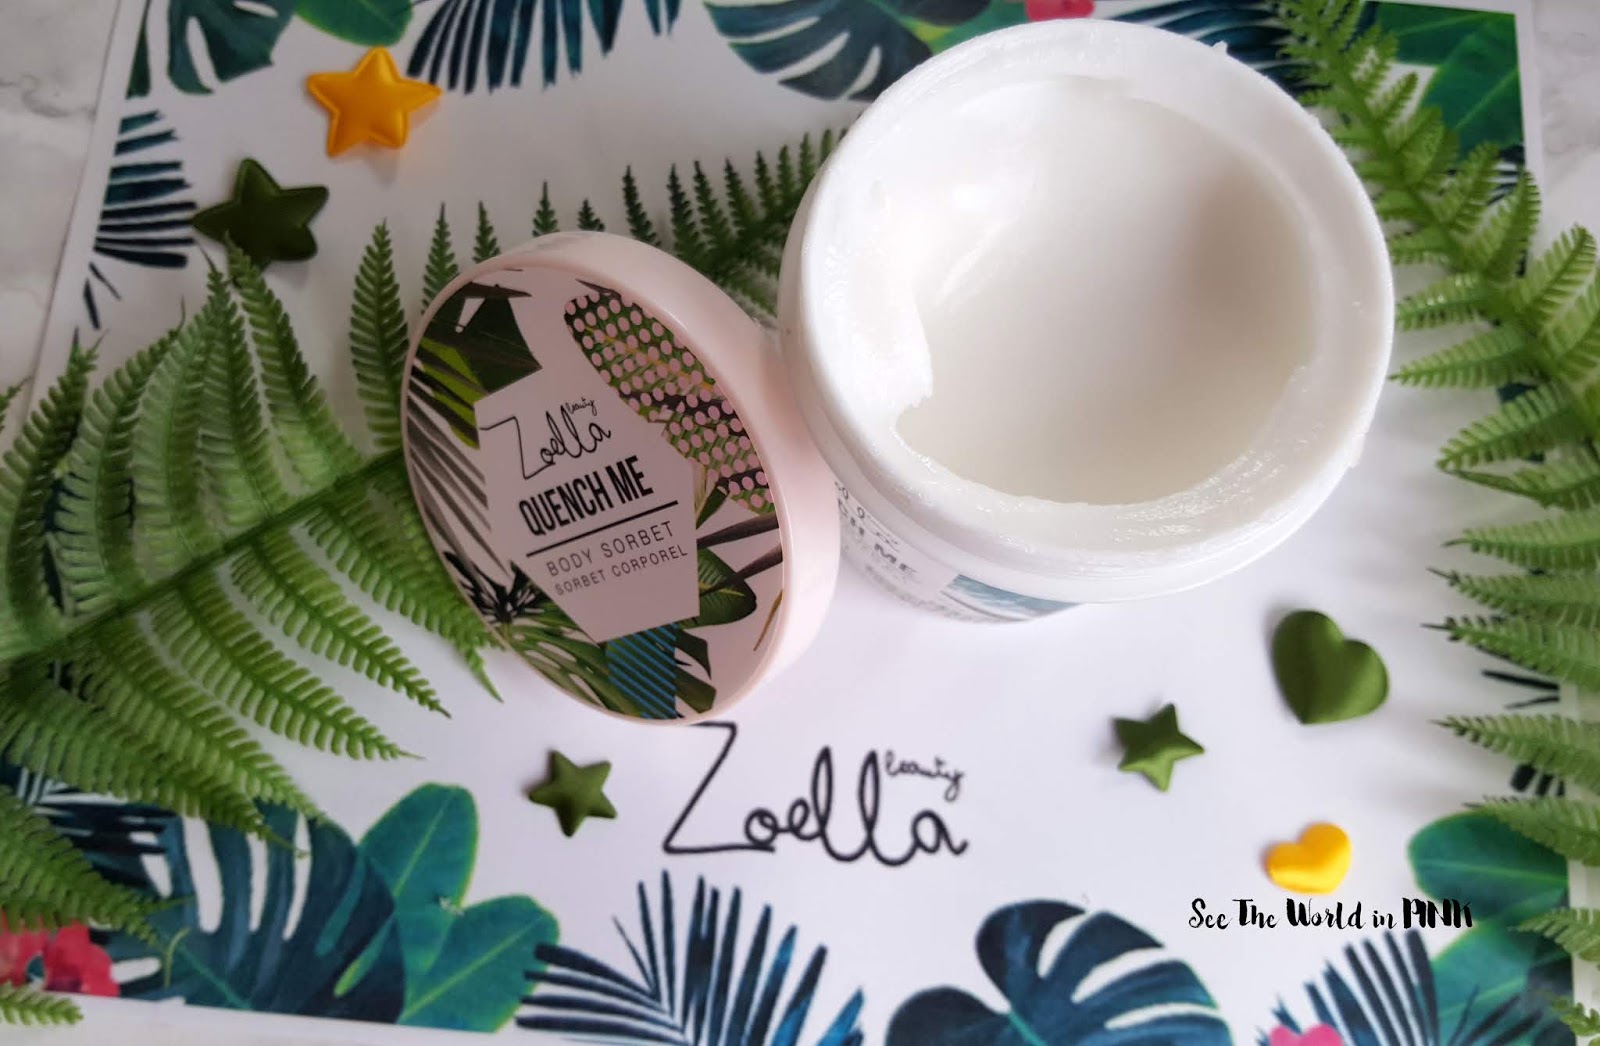 Skincare Sunday - Zoella Beauty Lip Oil & Body Sorbert Review & Giveaway!  